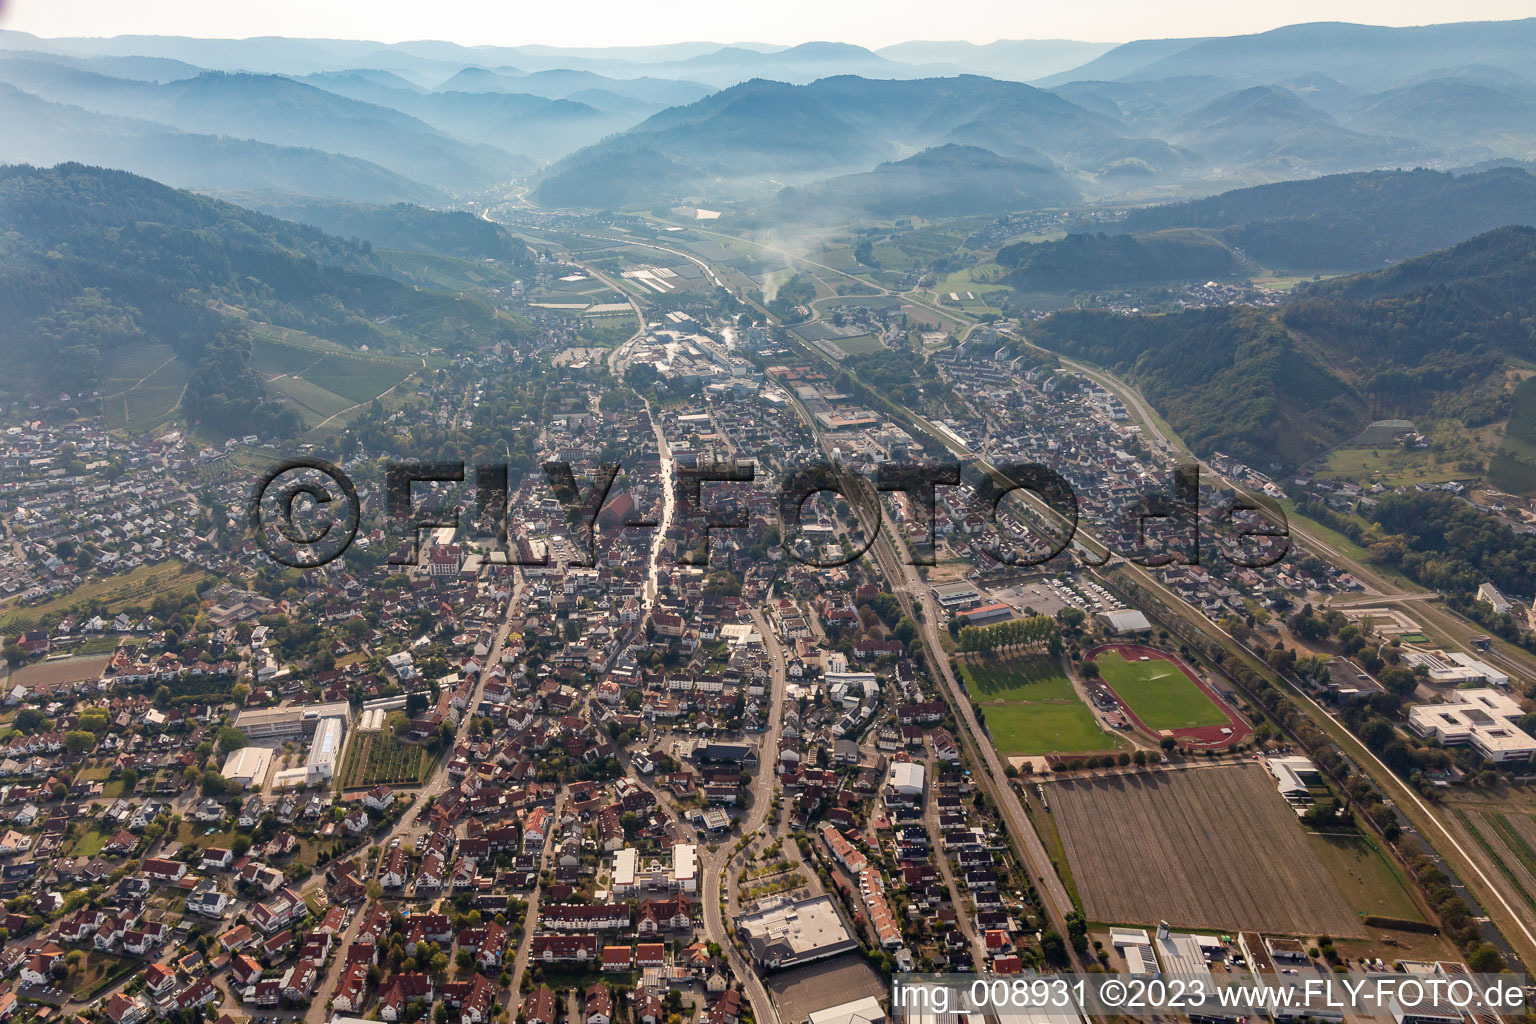 Location view of the streets and houses of residential areas in the Rench valley landscape surrounded by mountains of the black forest in Oberkirch in the state Baden-Wuerttemberg, Germany